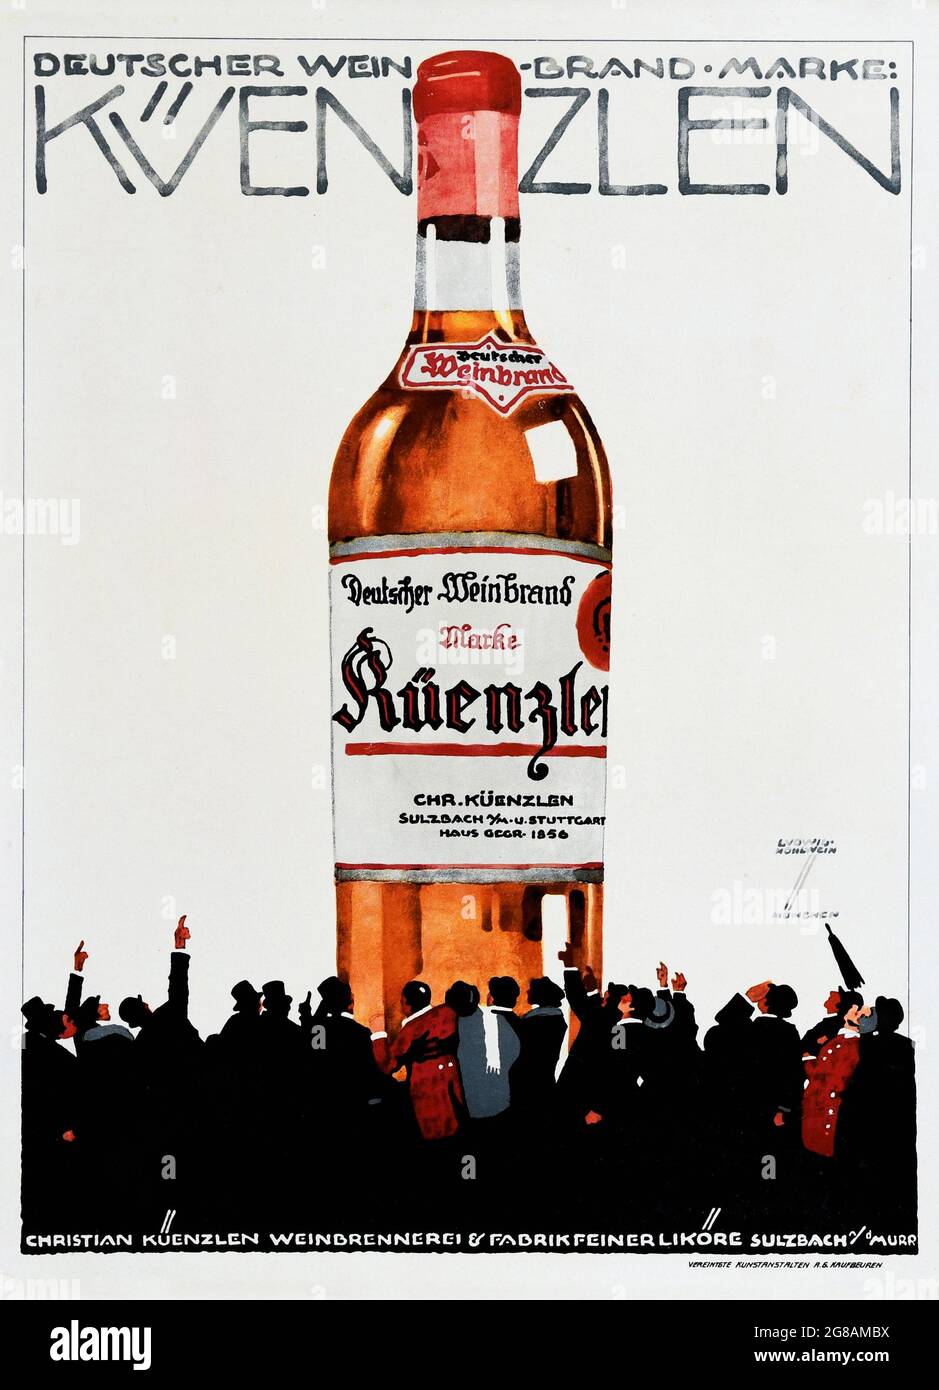 KUENZLEN GERMAN WINE, art by LUDWIG HOHLWEIN. Vintage advertisement for alcohol. Old times advertising. Stock Photo